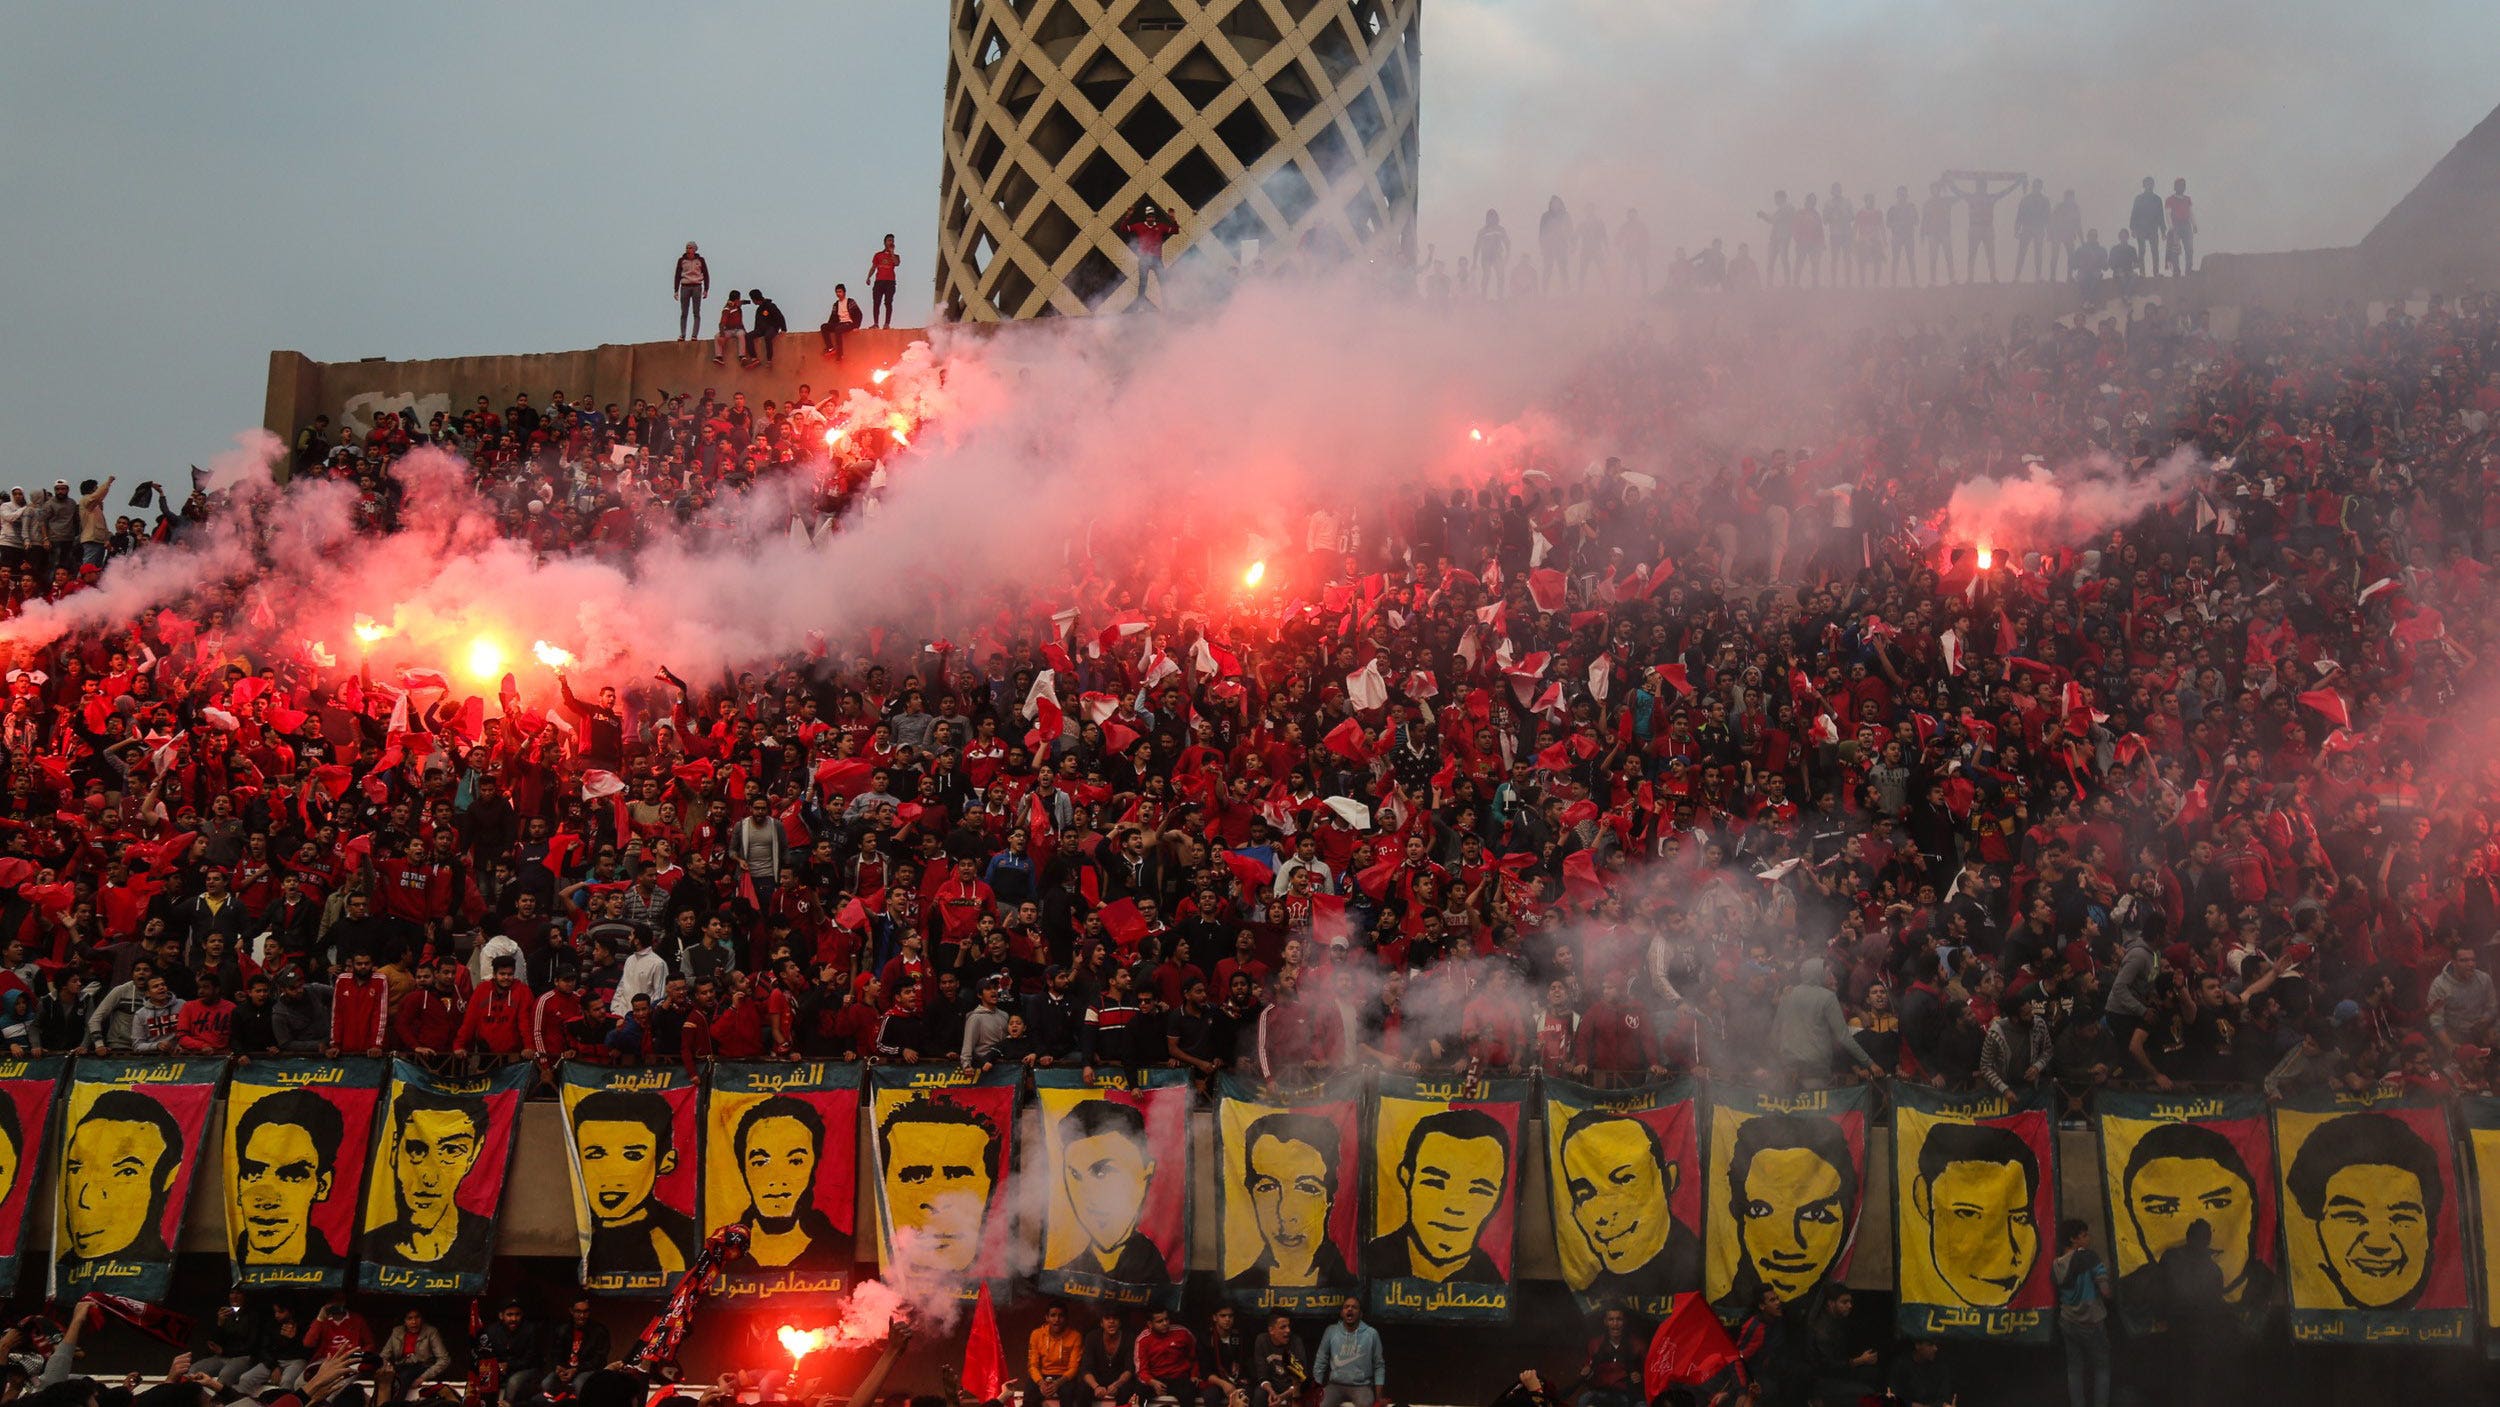 After Indonesian soccer match left 131 dead, a look back on other major soccer crowd tragedies